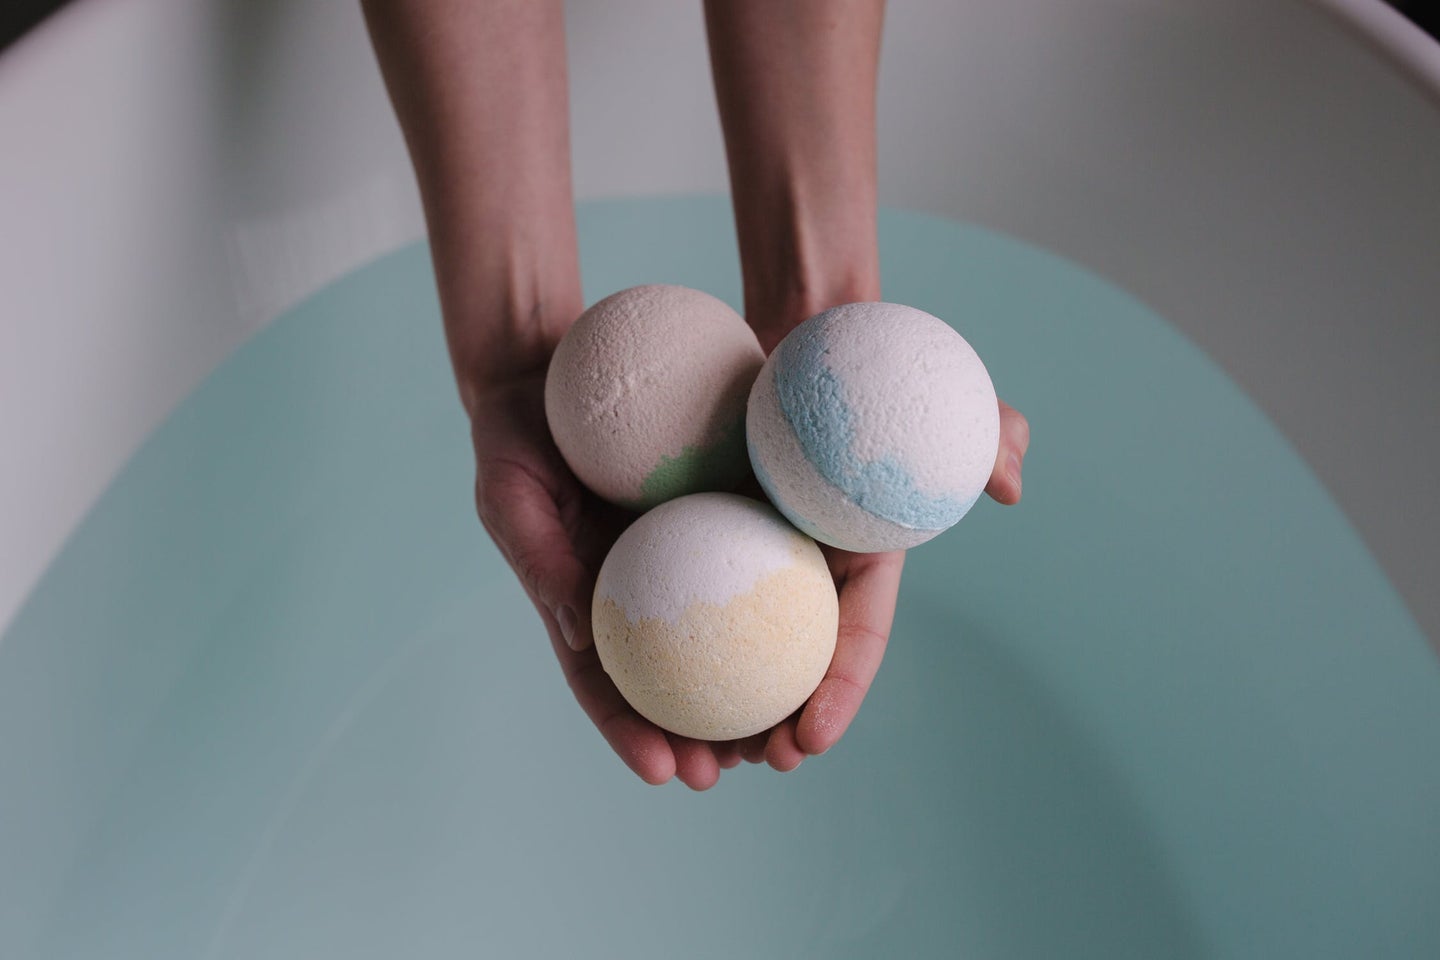 A pair of hands holds three homemade bath bombs over a bath tub full of water.